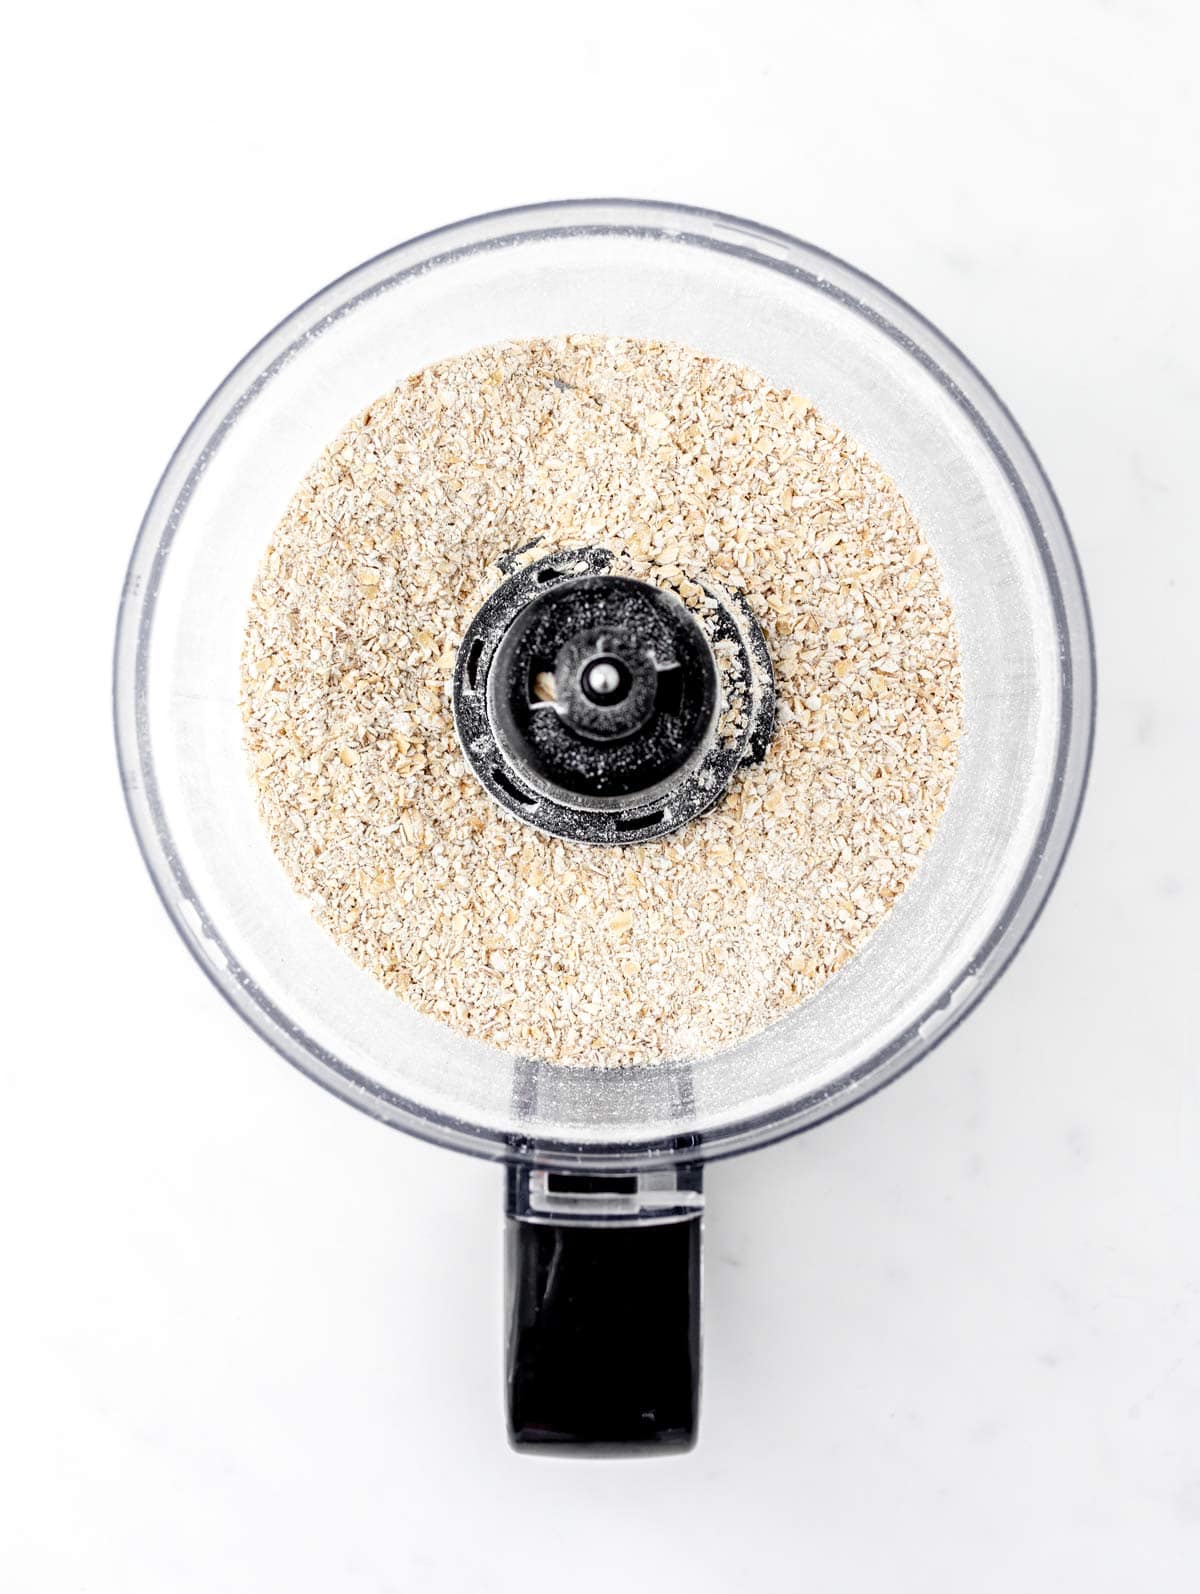 Oats ground up into oat flour in a food processor.